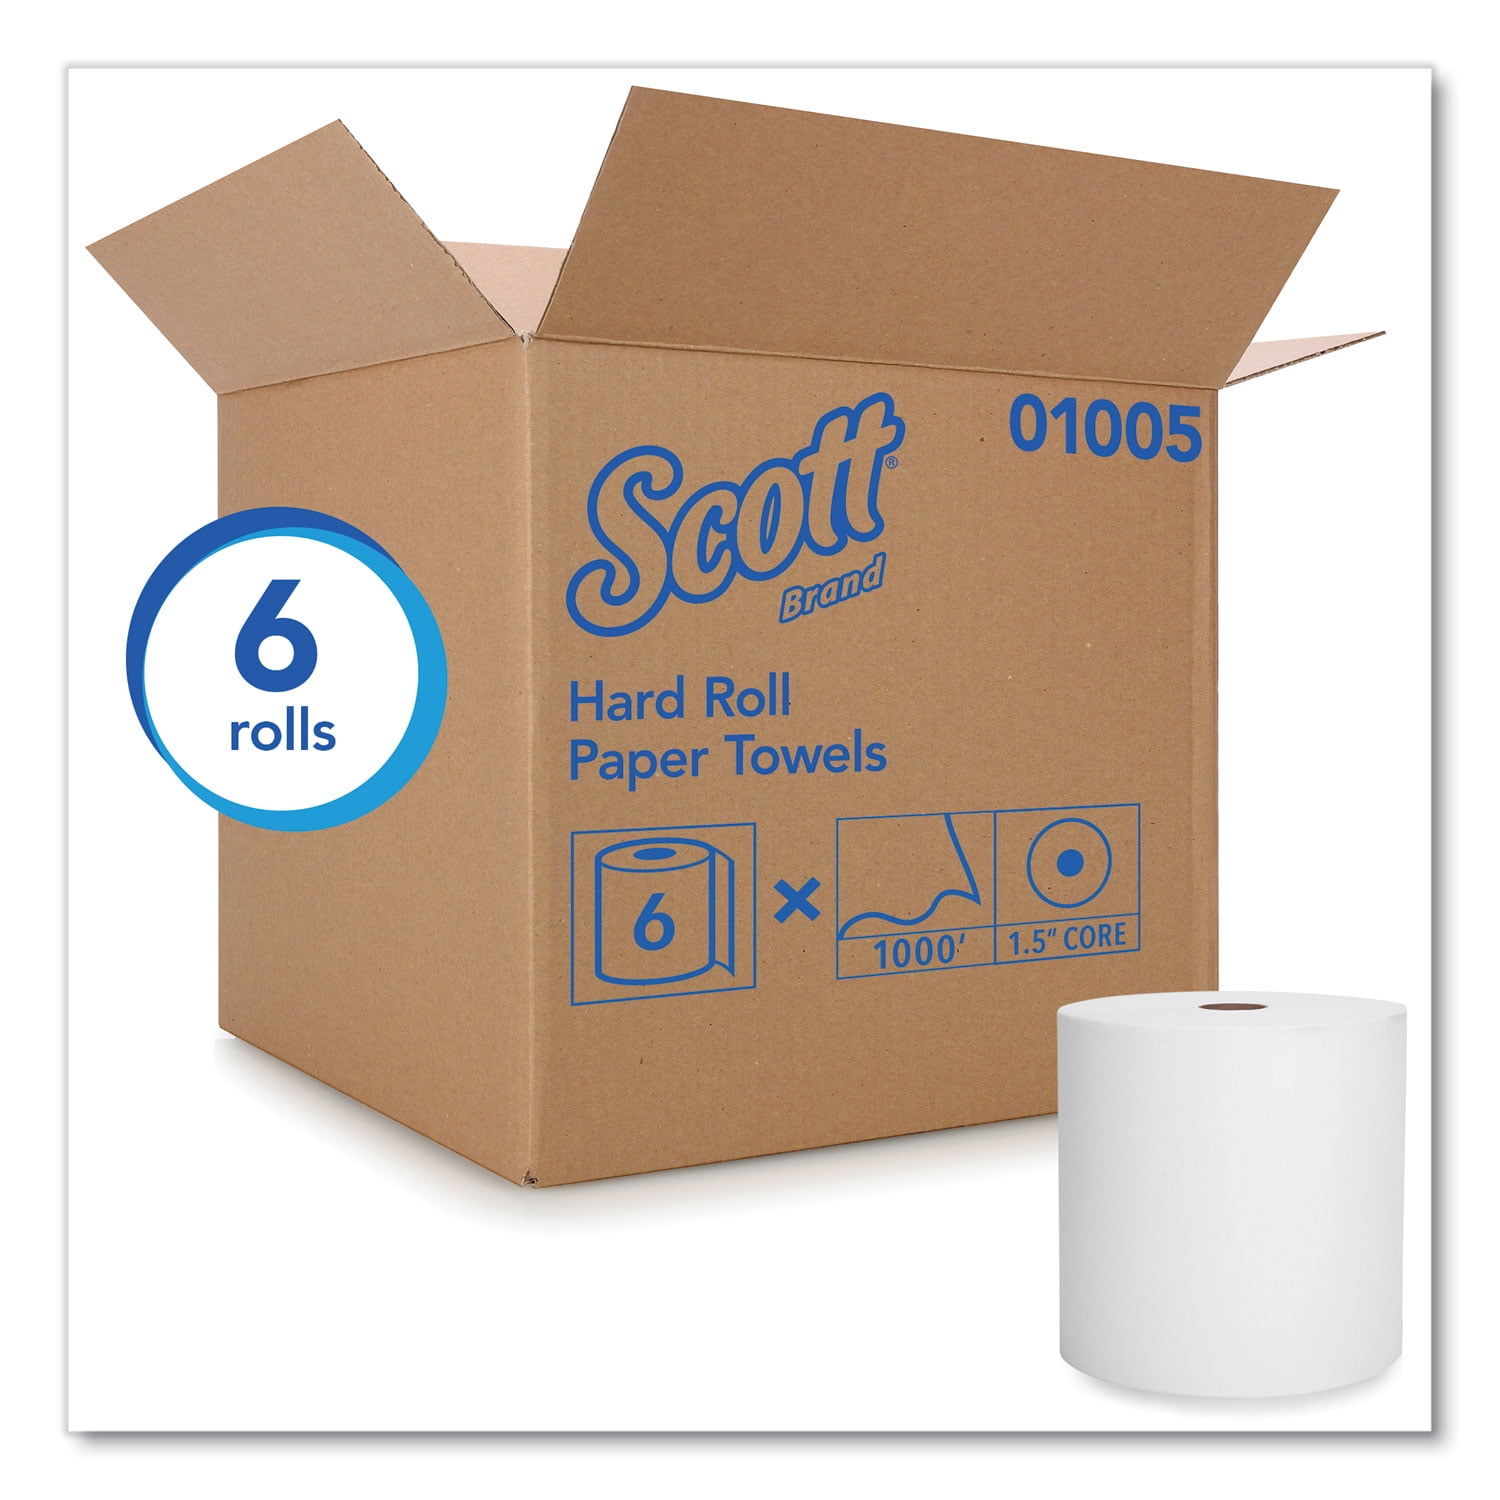 KCC02001 Details about   Scott Essential 950 ft White Hard Roll Paper Towels 6 Rolls 